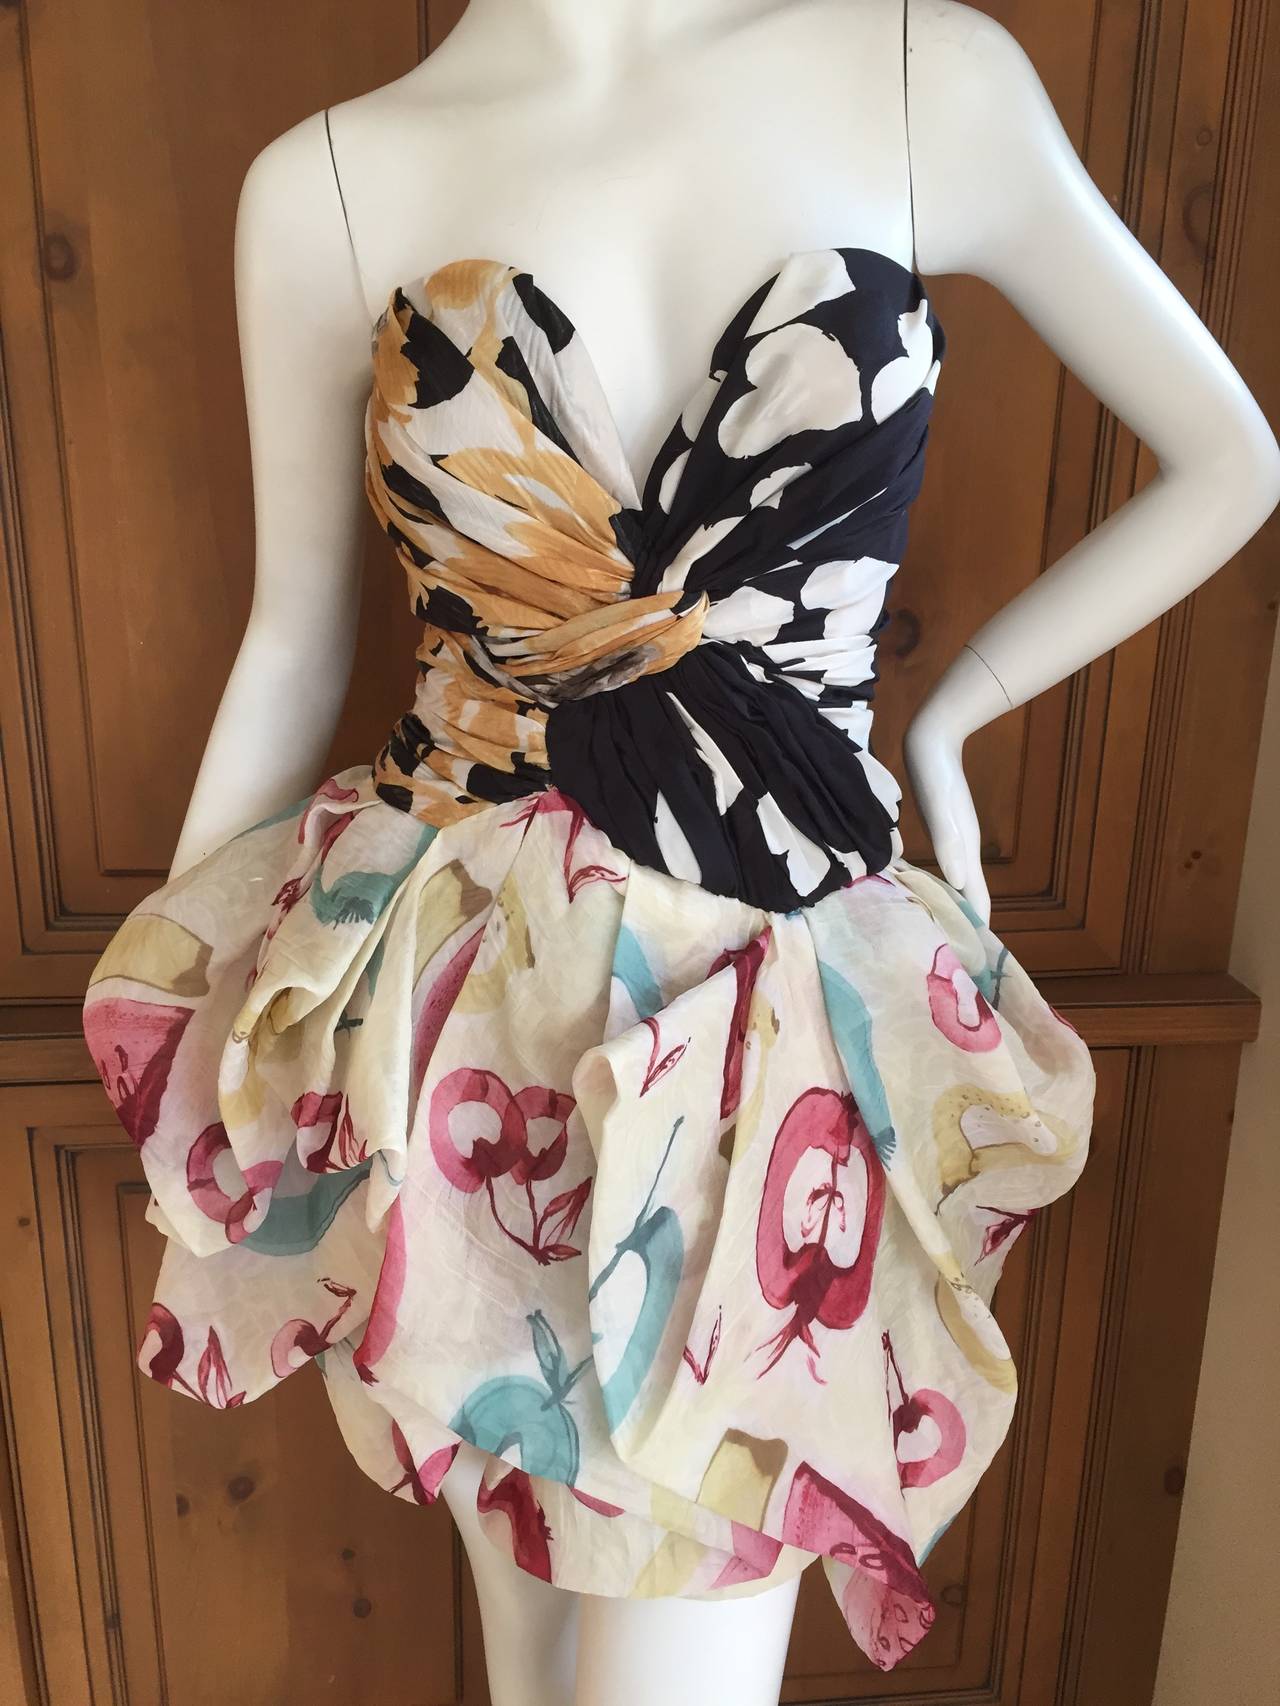 MOSCHINO Vintage Silk Party Dress with Built in Corset
This is so beautiful, the photos don't capture its charm
The corset is the entire top, so wonderfully crafted
I believe this to be an early 80's Moschino, there is a lot of hand work,  a